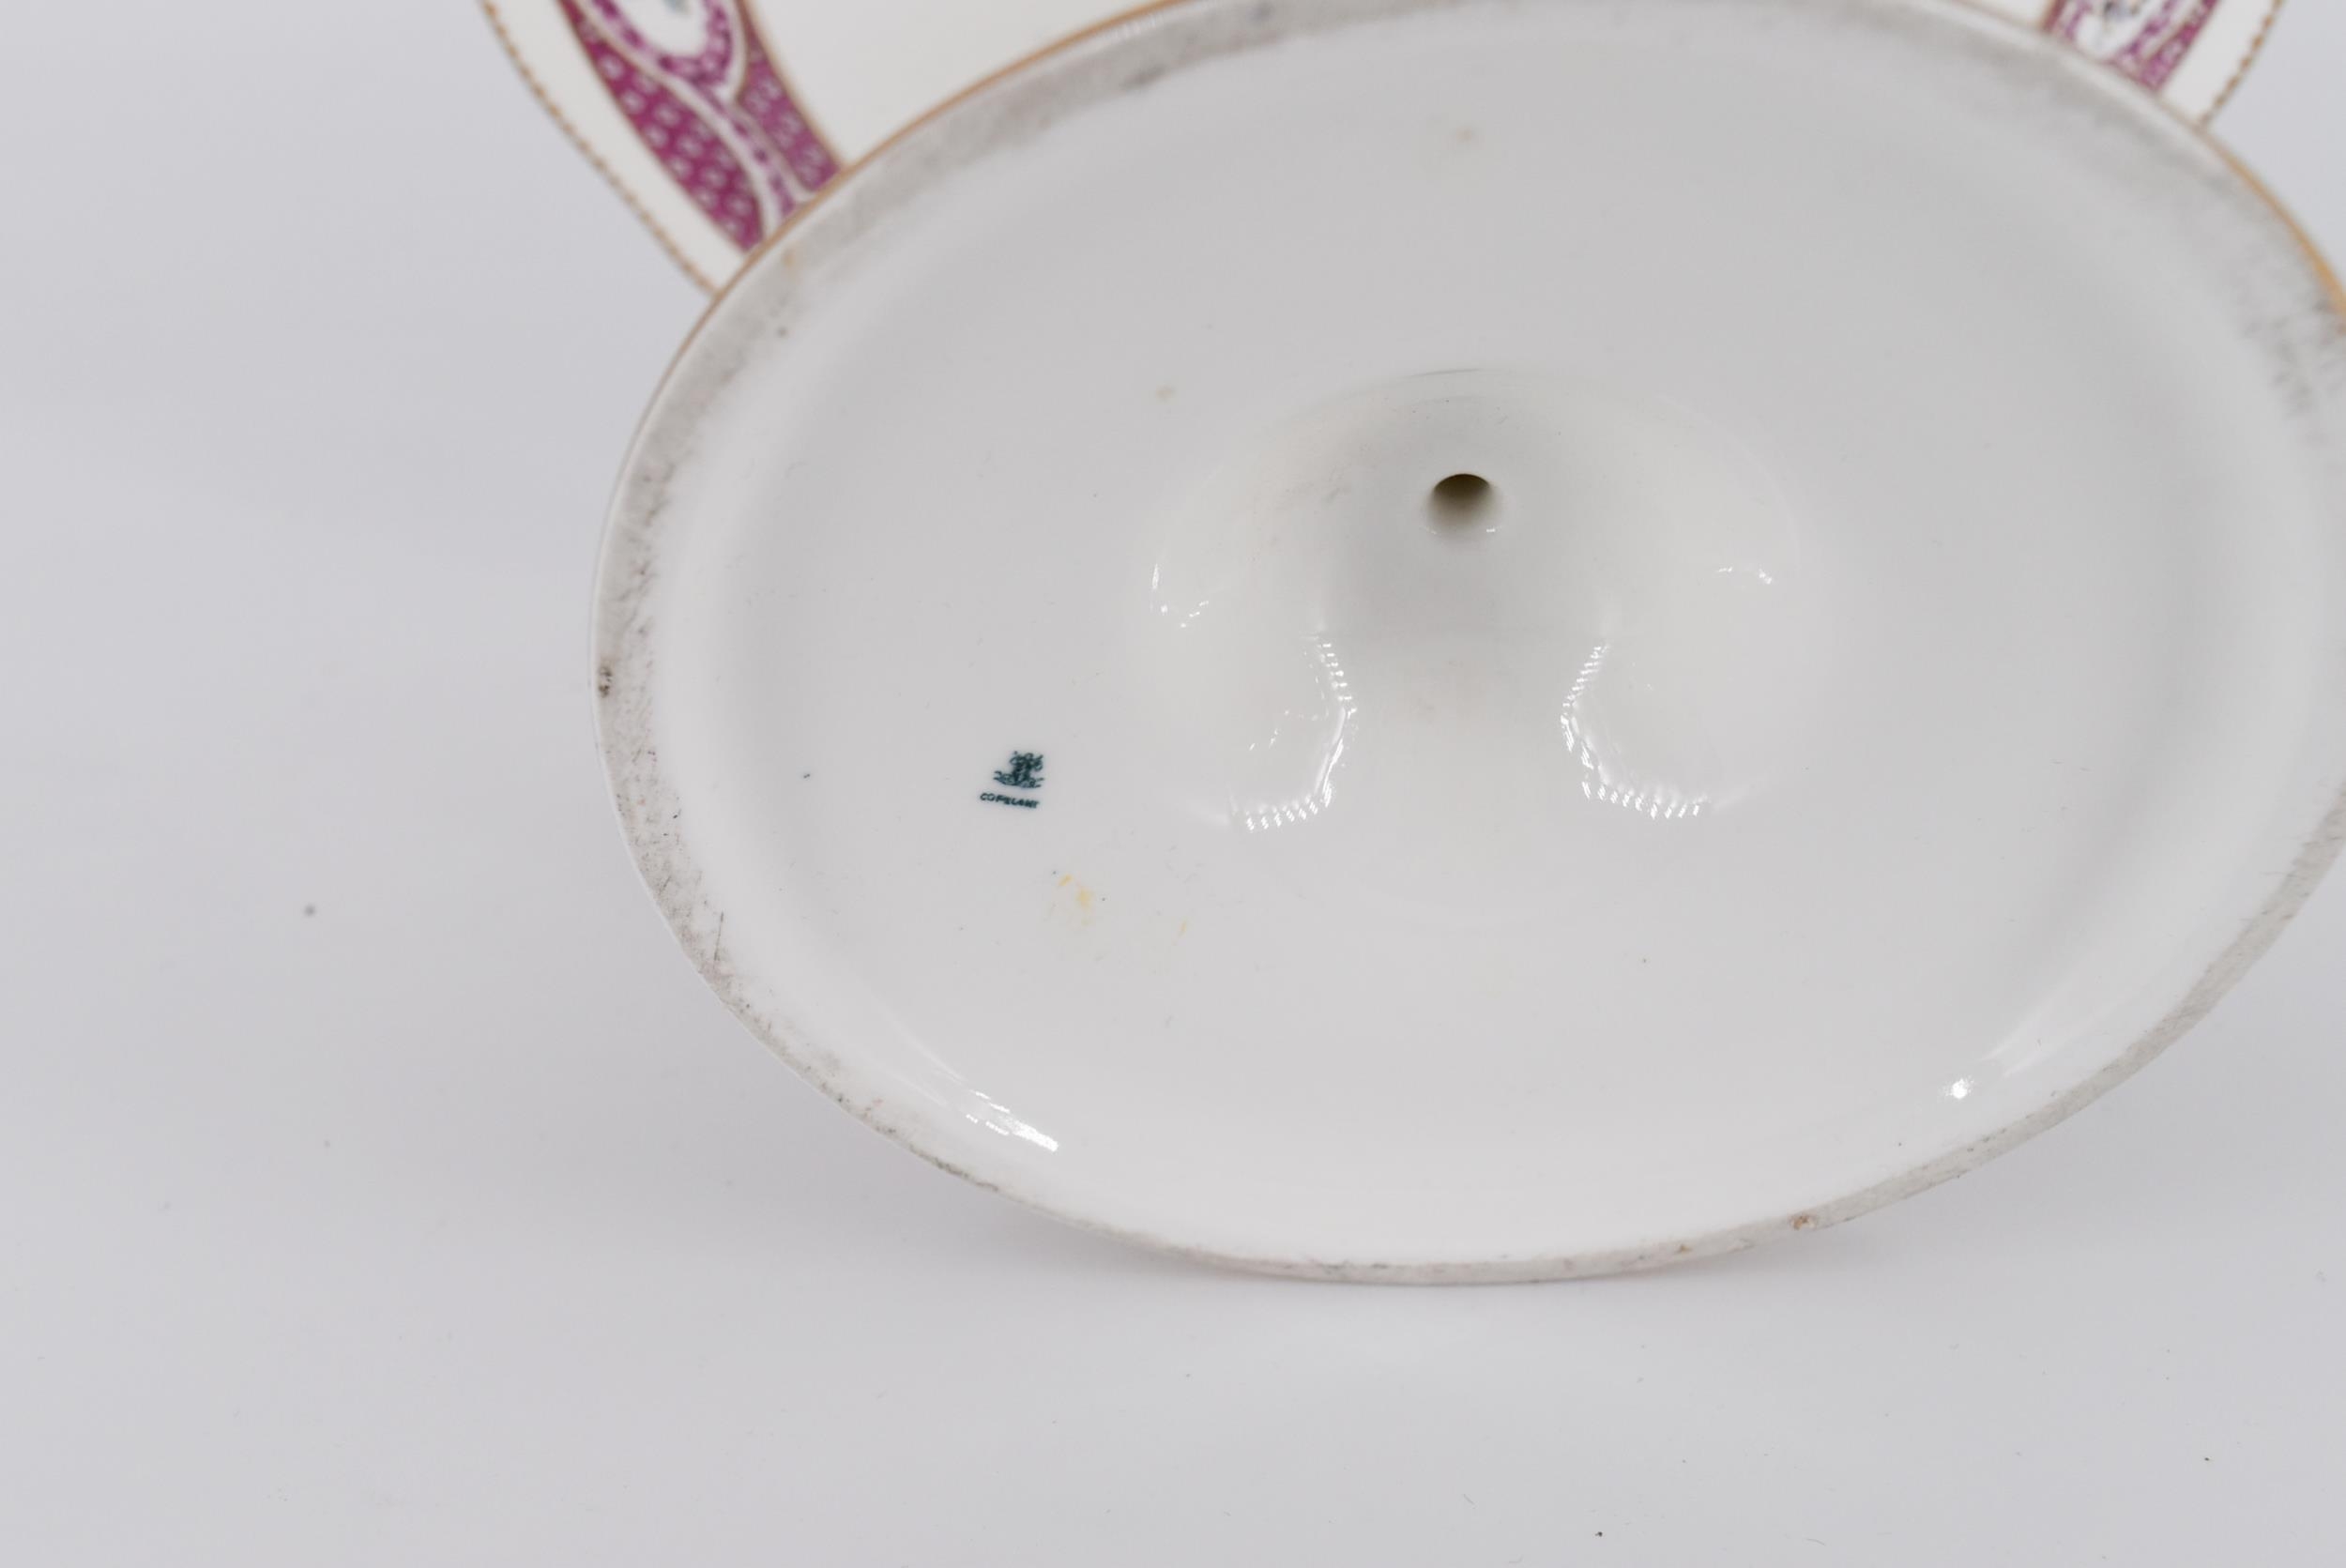 A 20th century Chinese porcelain bowl with dragon decoration along with a rose design and gilded - Image 7 of 7